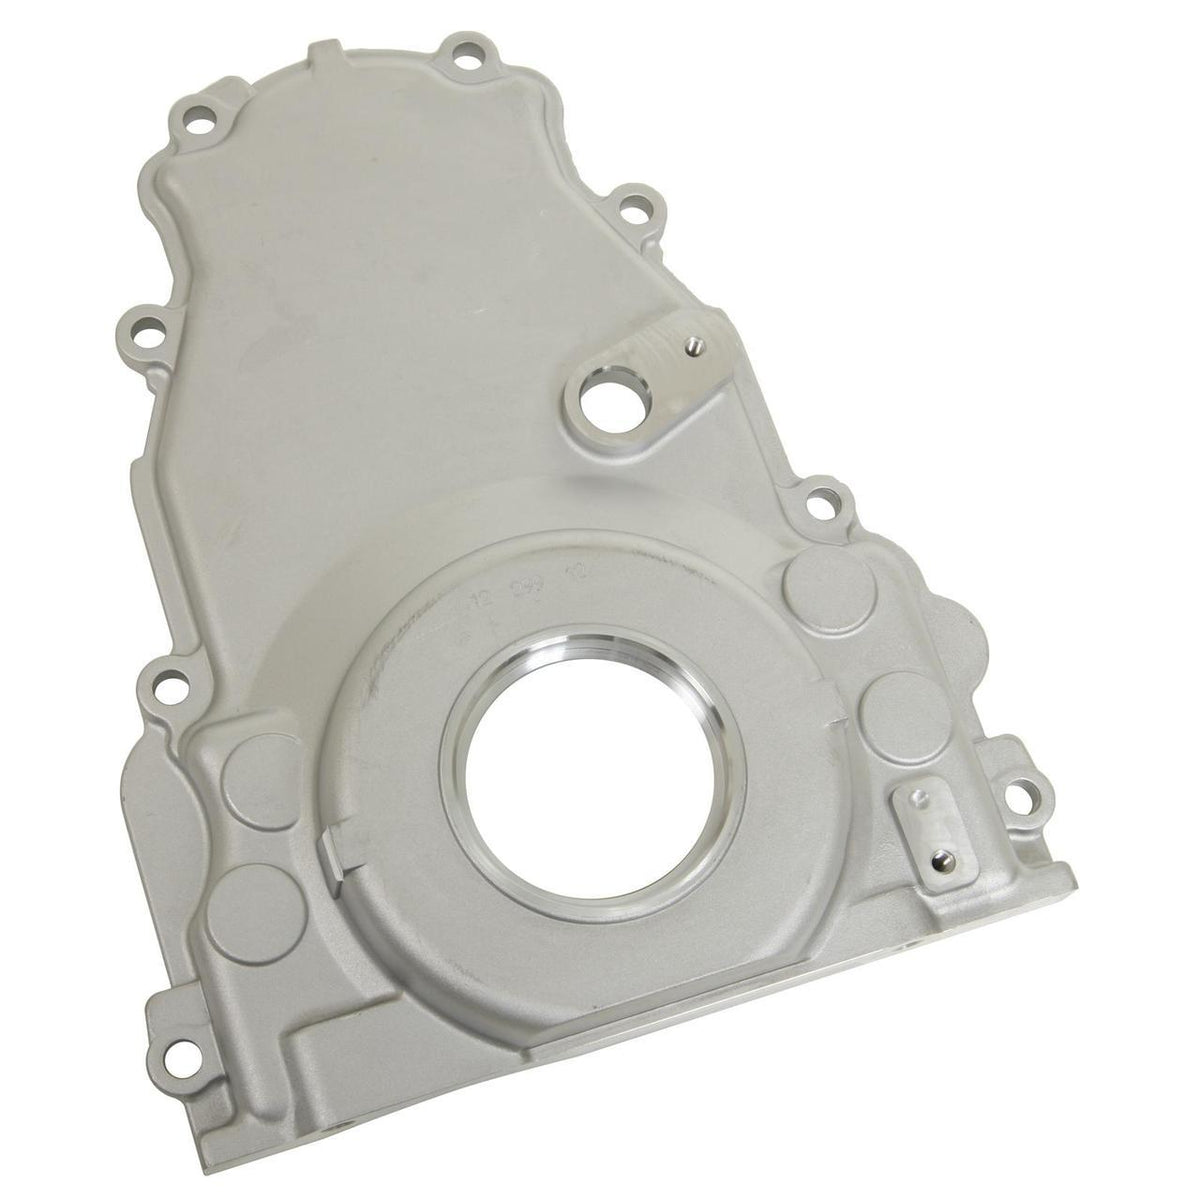 LS2/LS3 NON-VVT ENGINE TIMING CHAIN COVER CHEVROLET PERFORMANCE